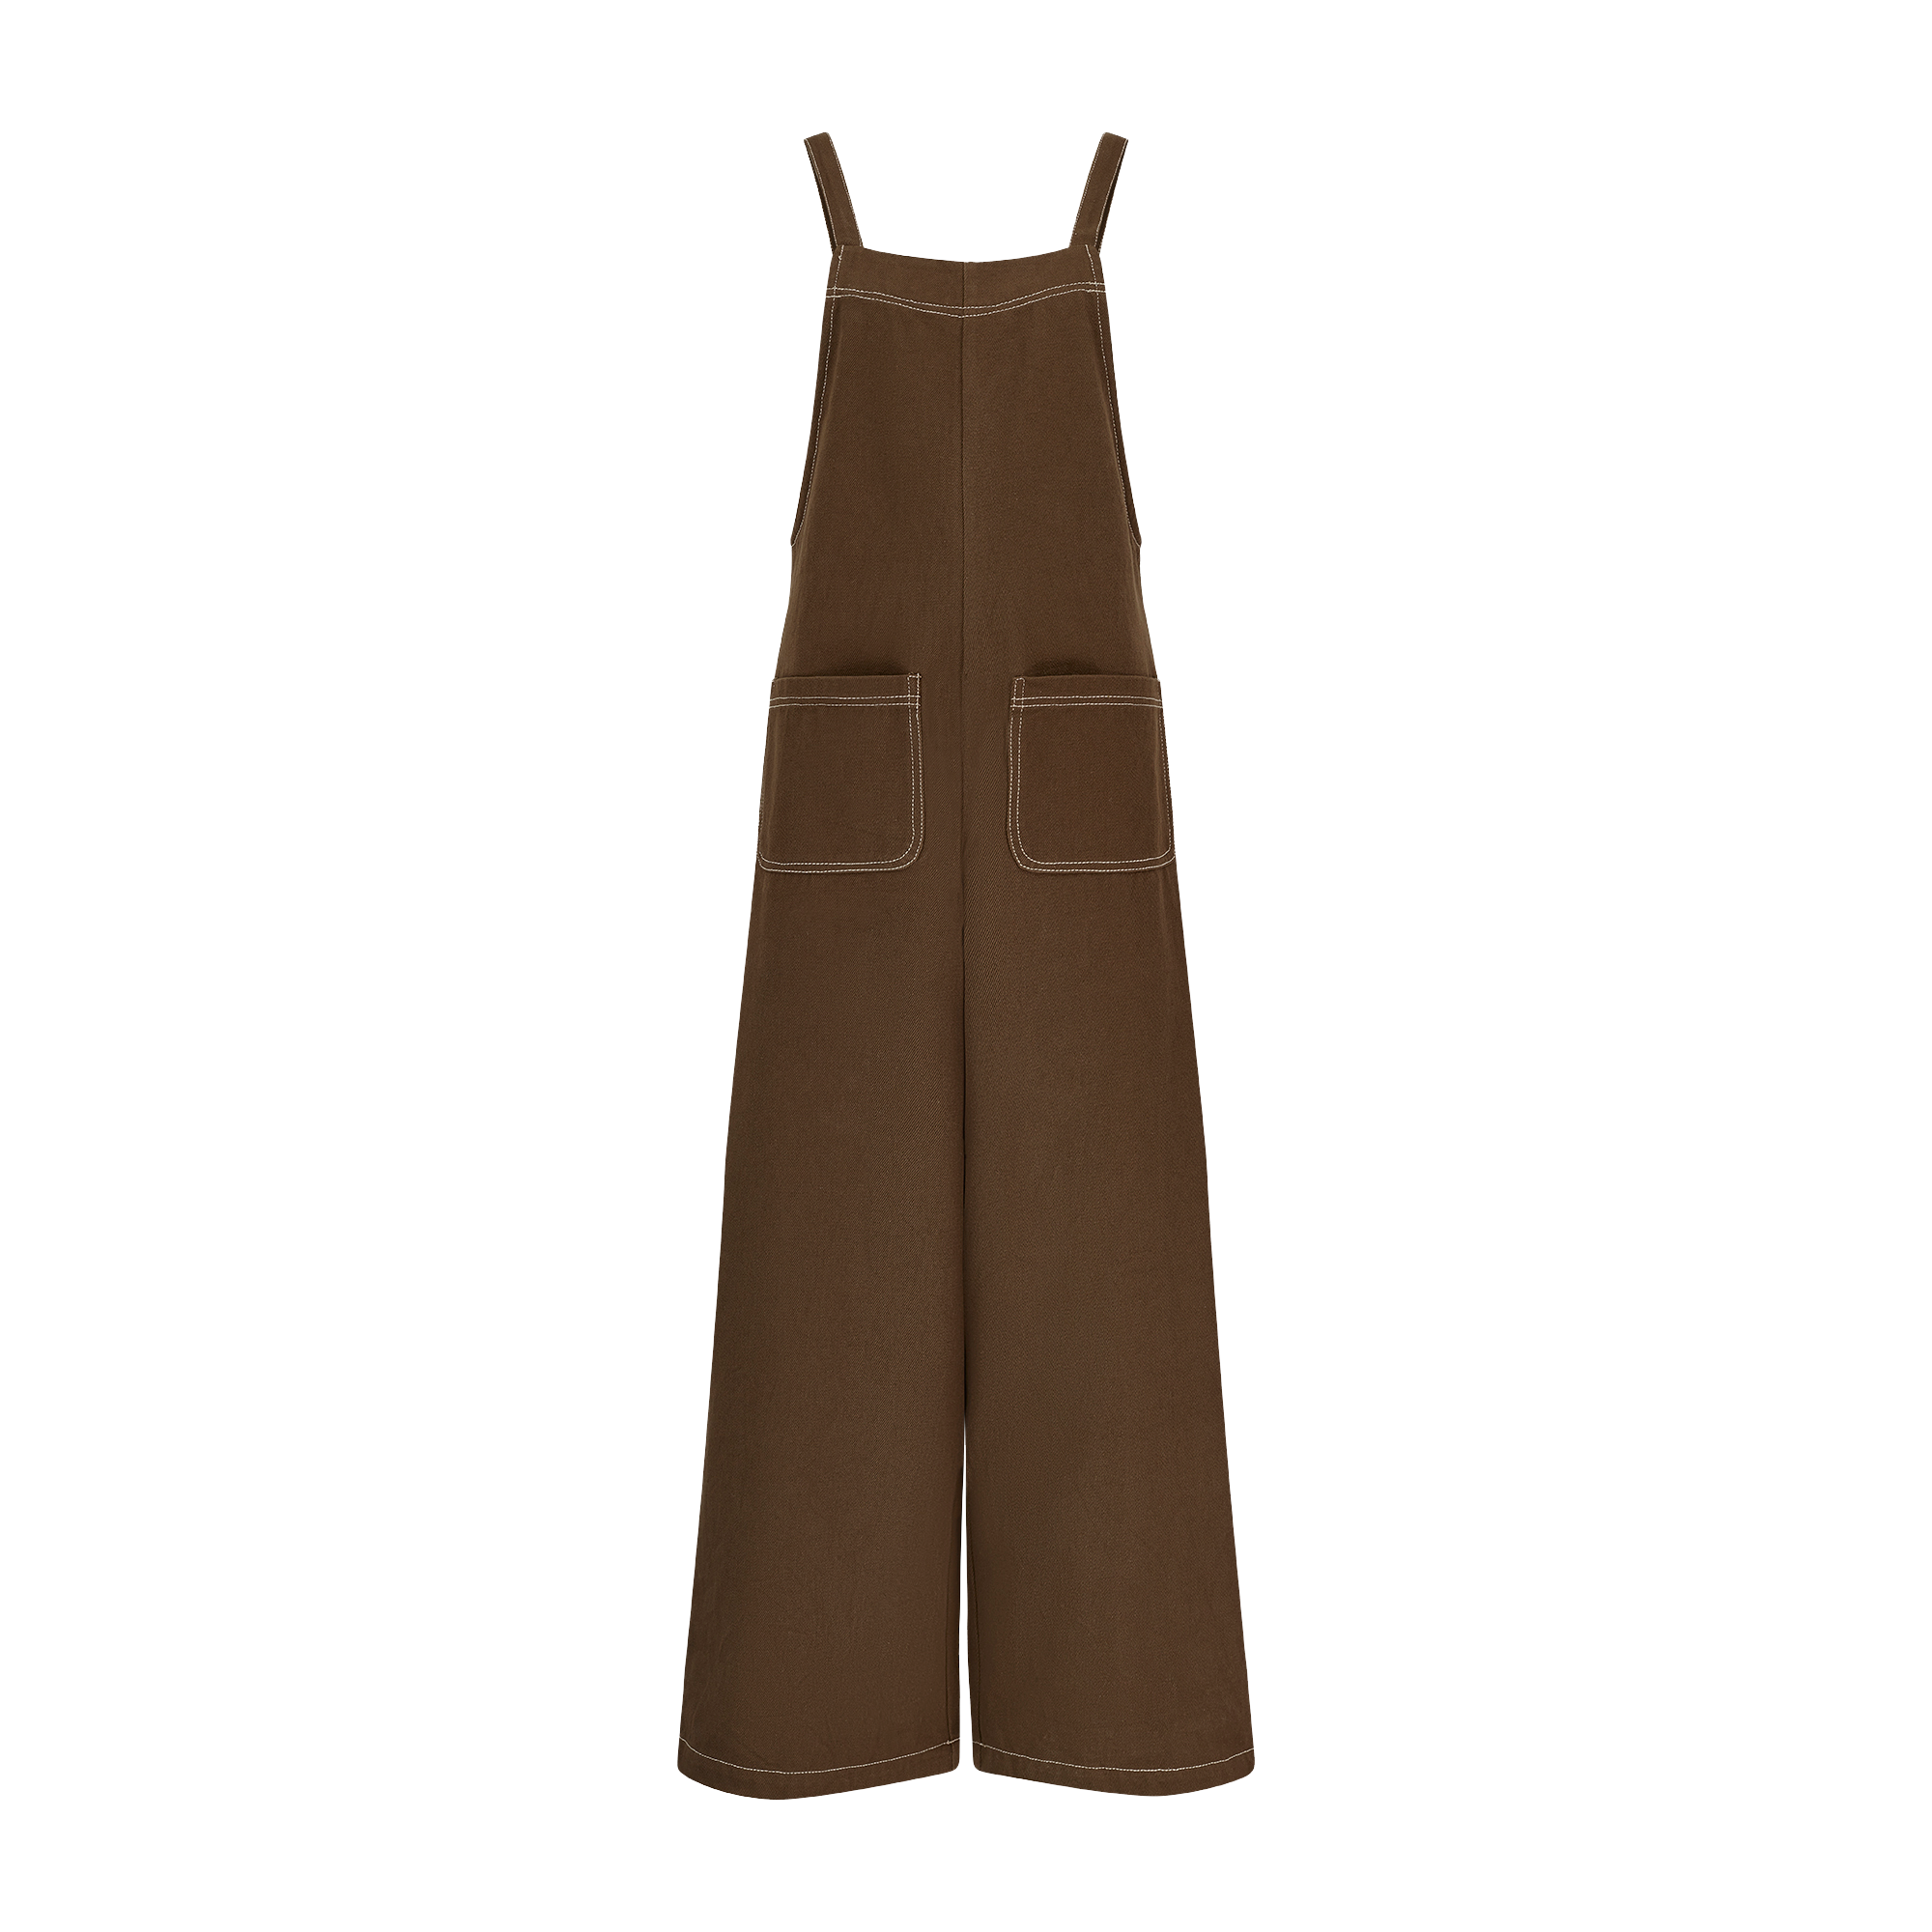 The Dungarees